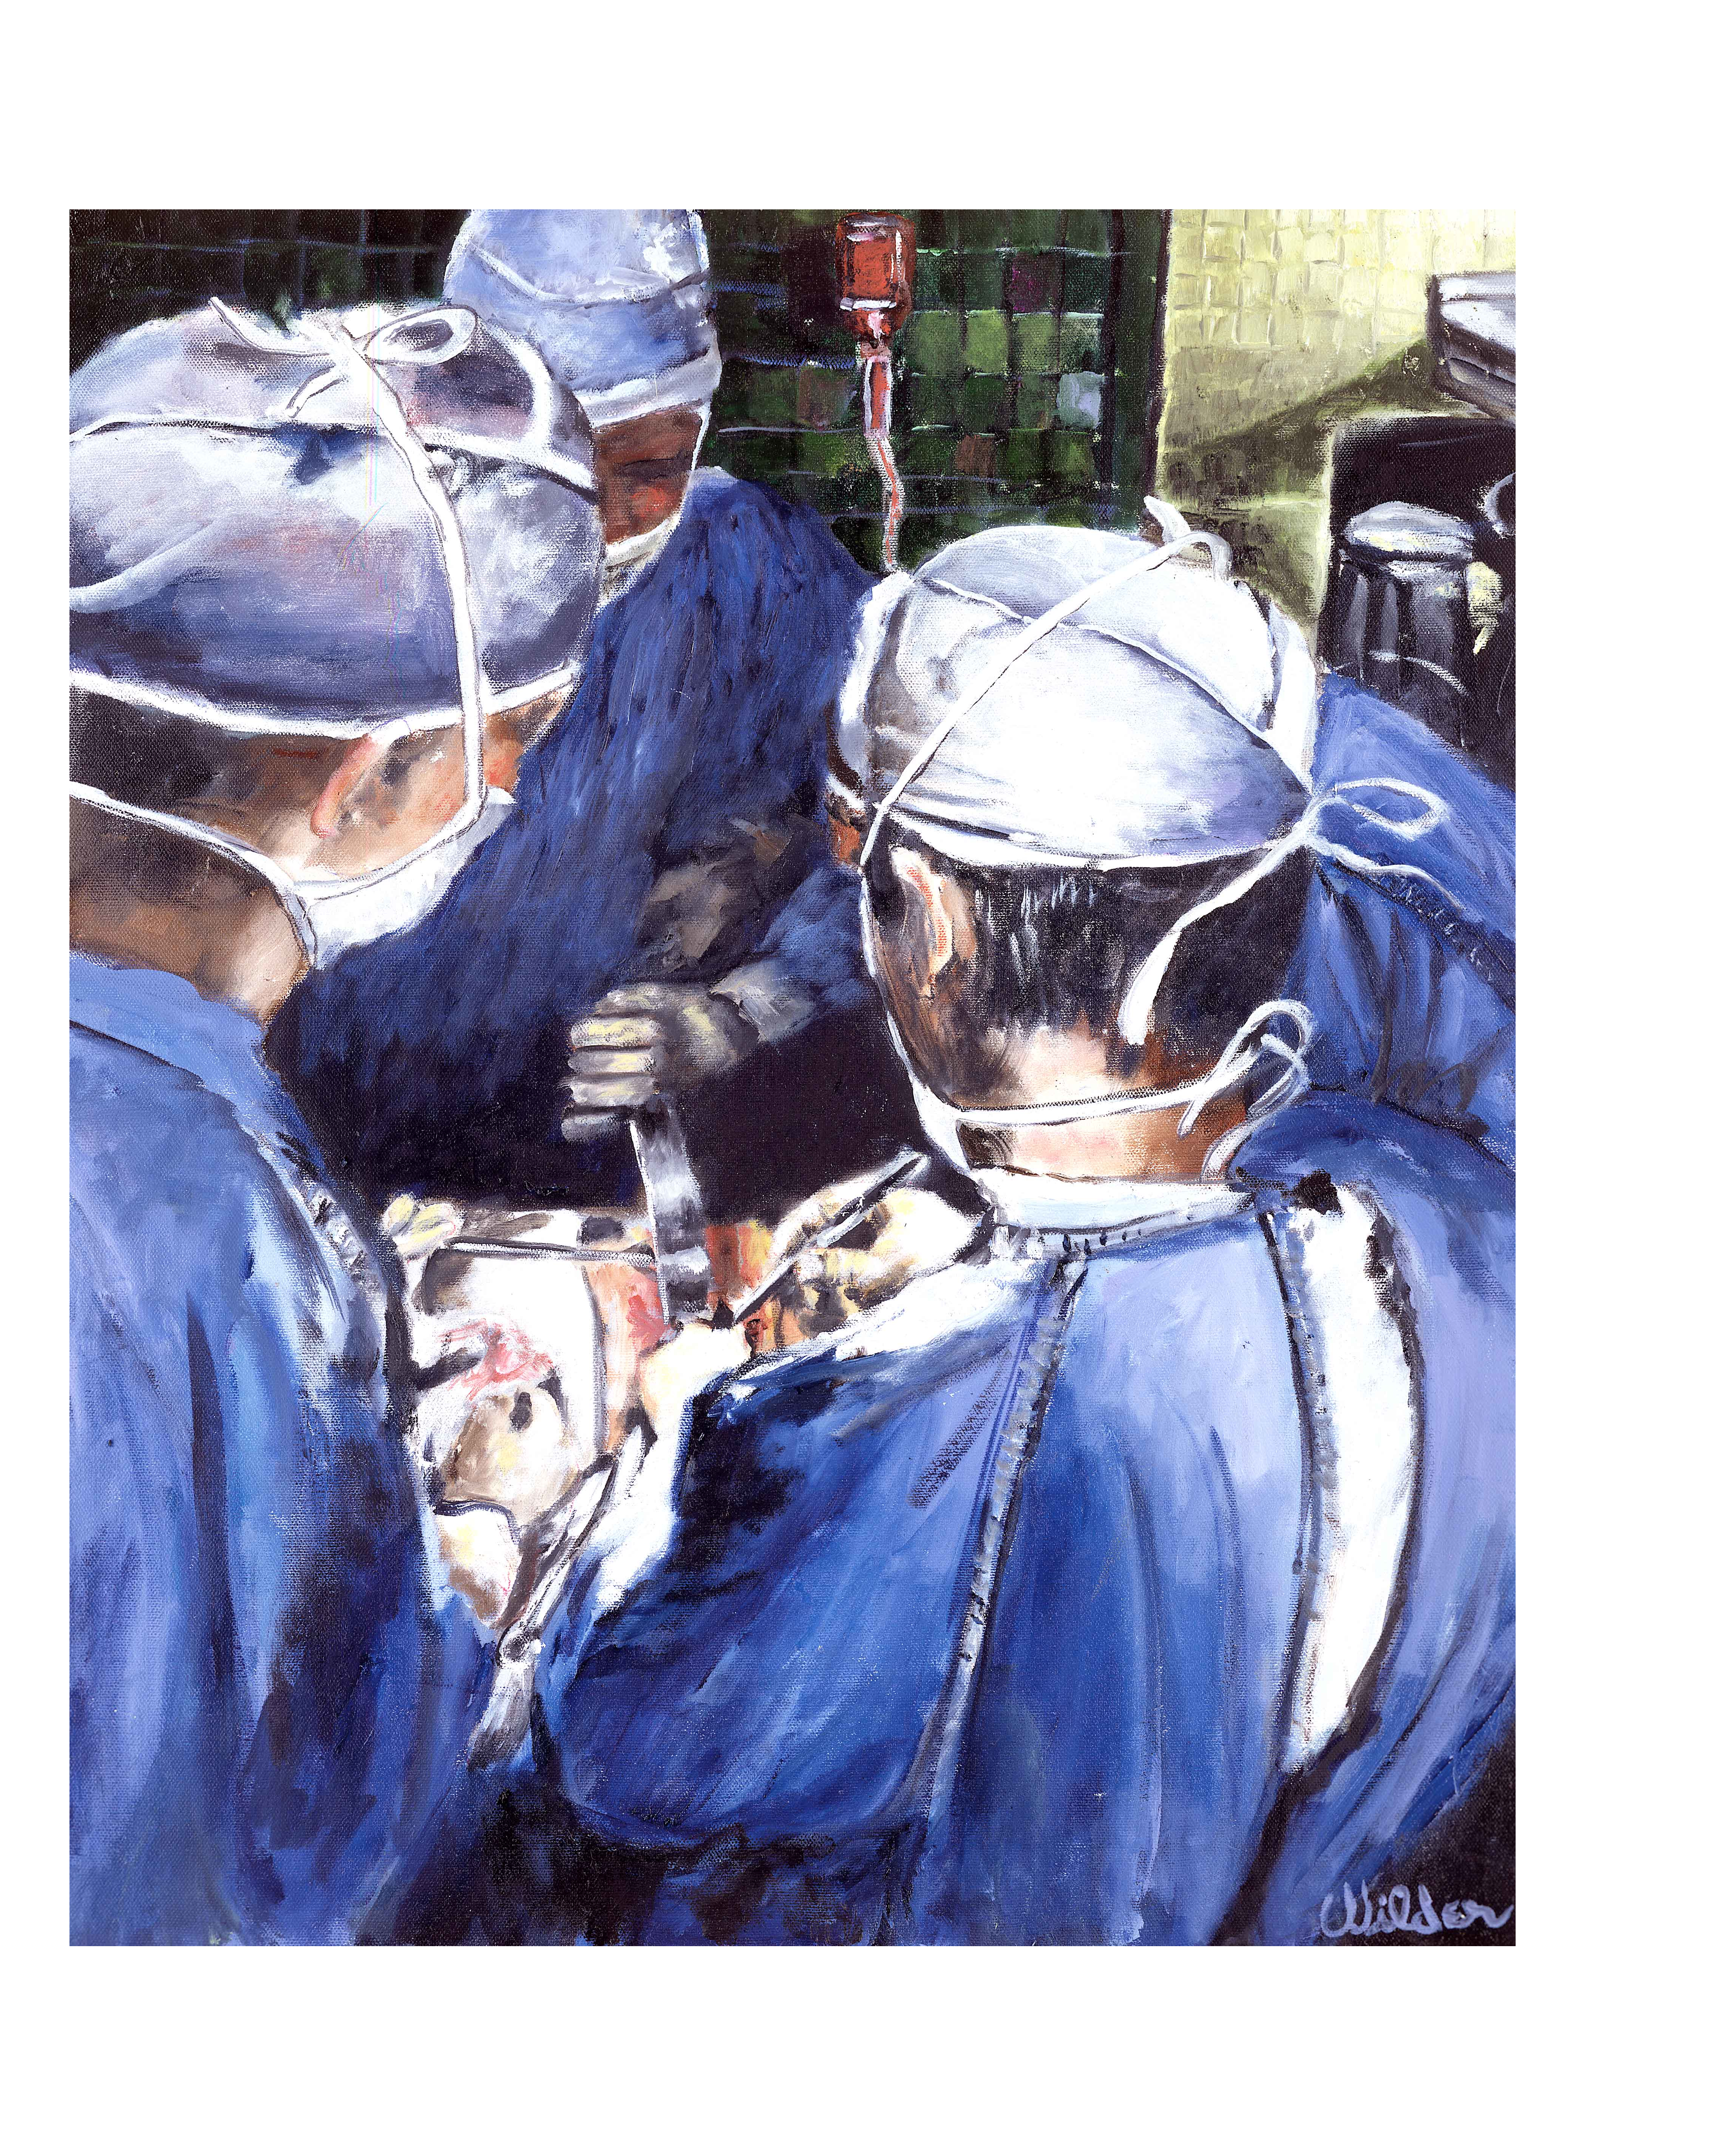 Surgeons Deep-In-Surgery Performing Surgery